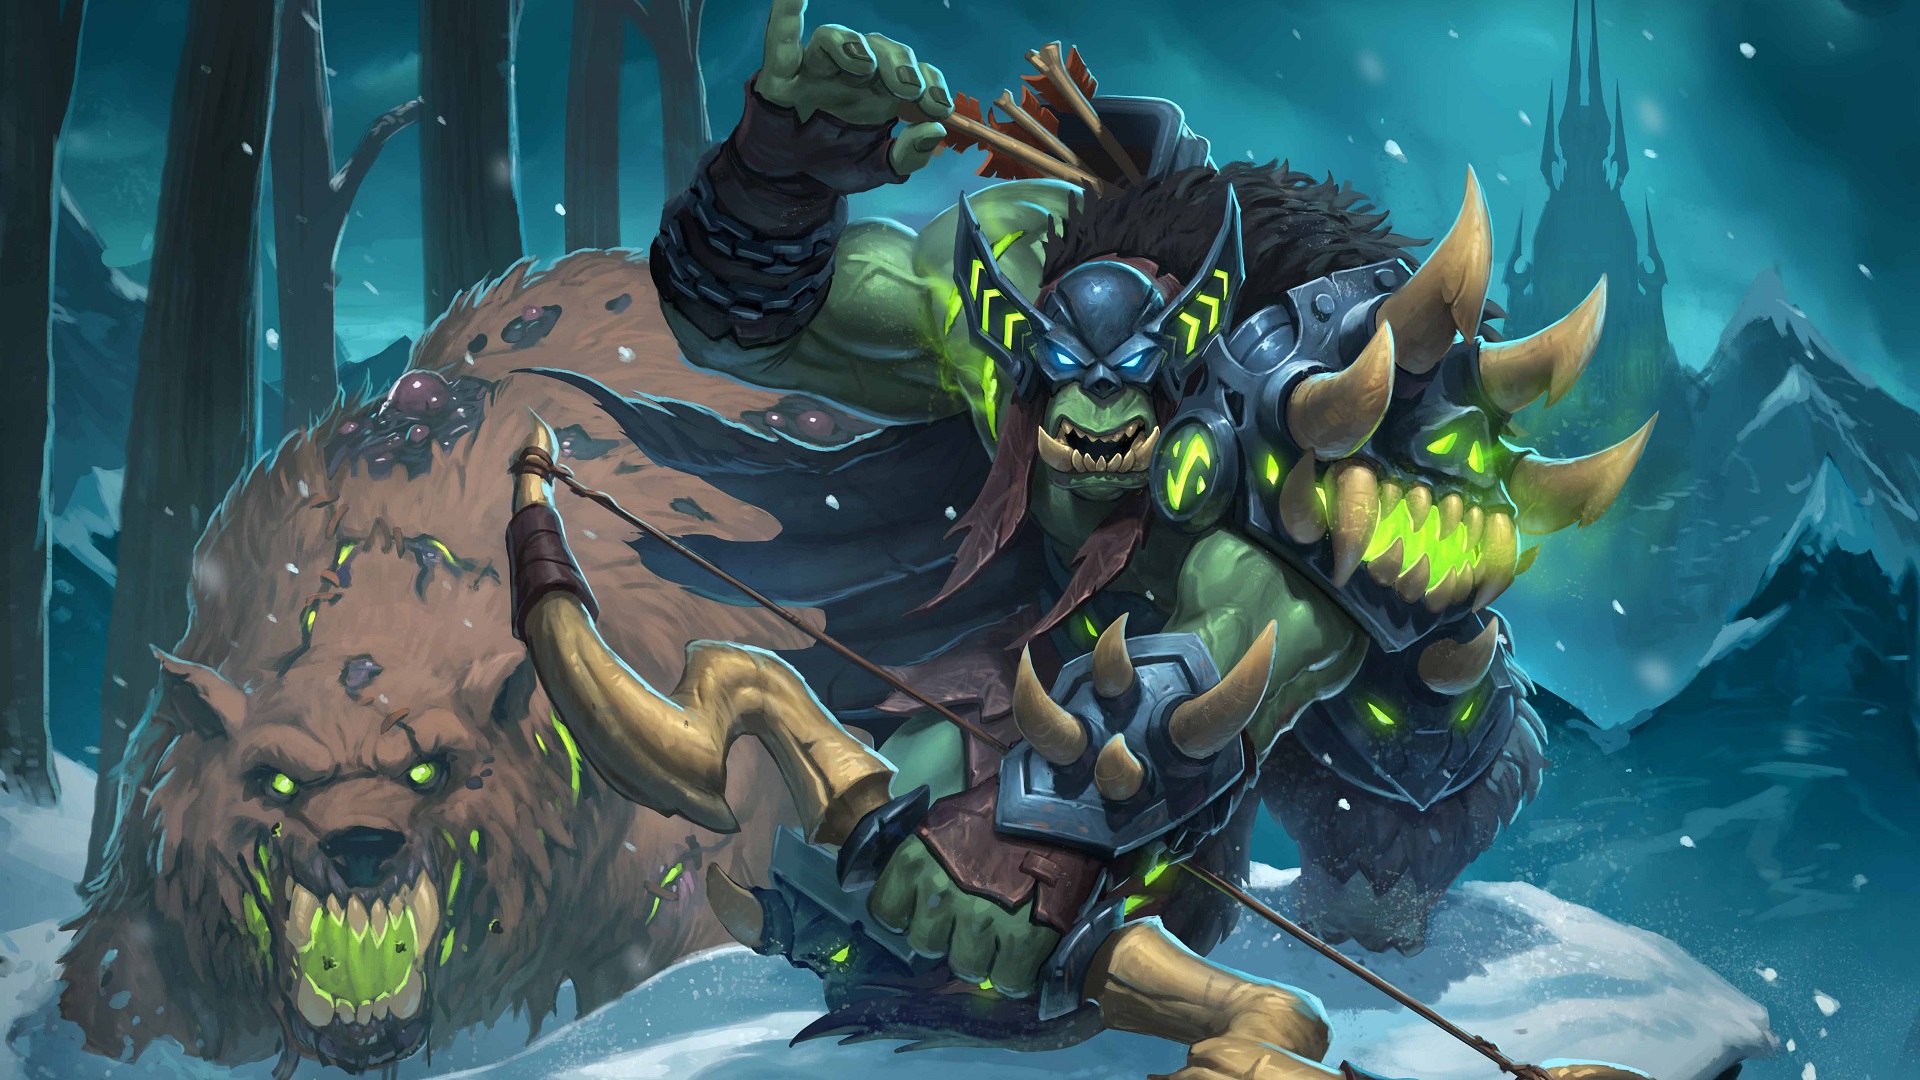 Hearthstone Heroes Of Warcraft Hearthstone Warcraft Cards Artwork Knights Of The Frozen Throne Death 1920x1080